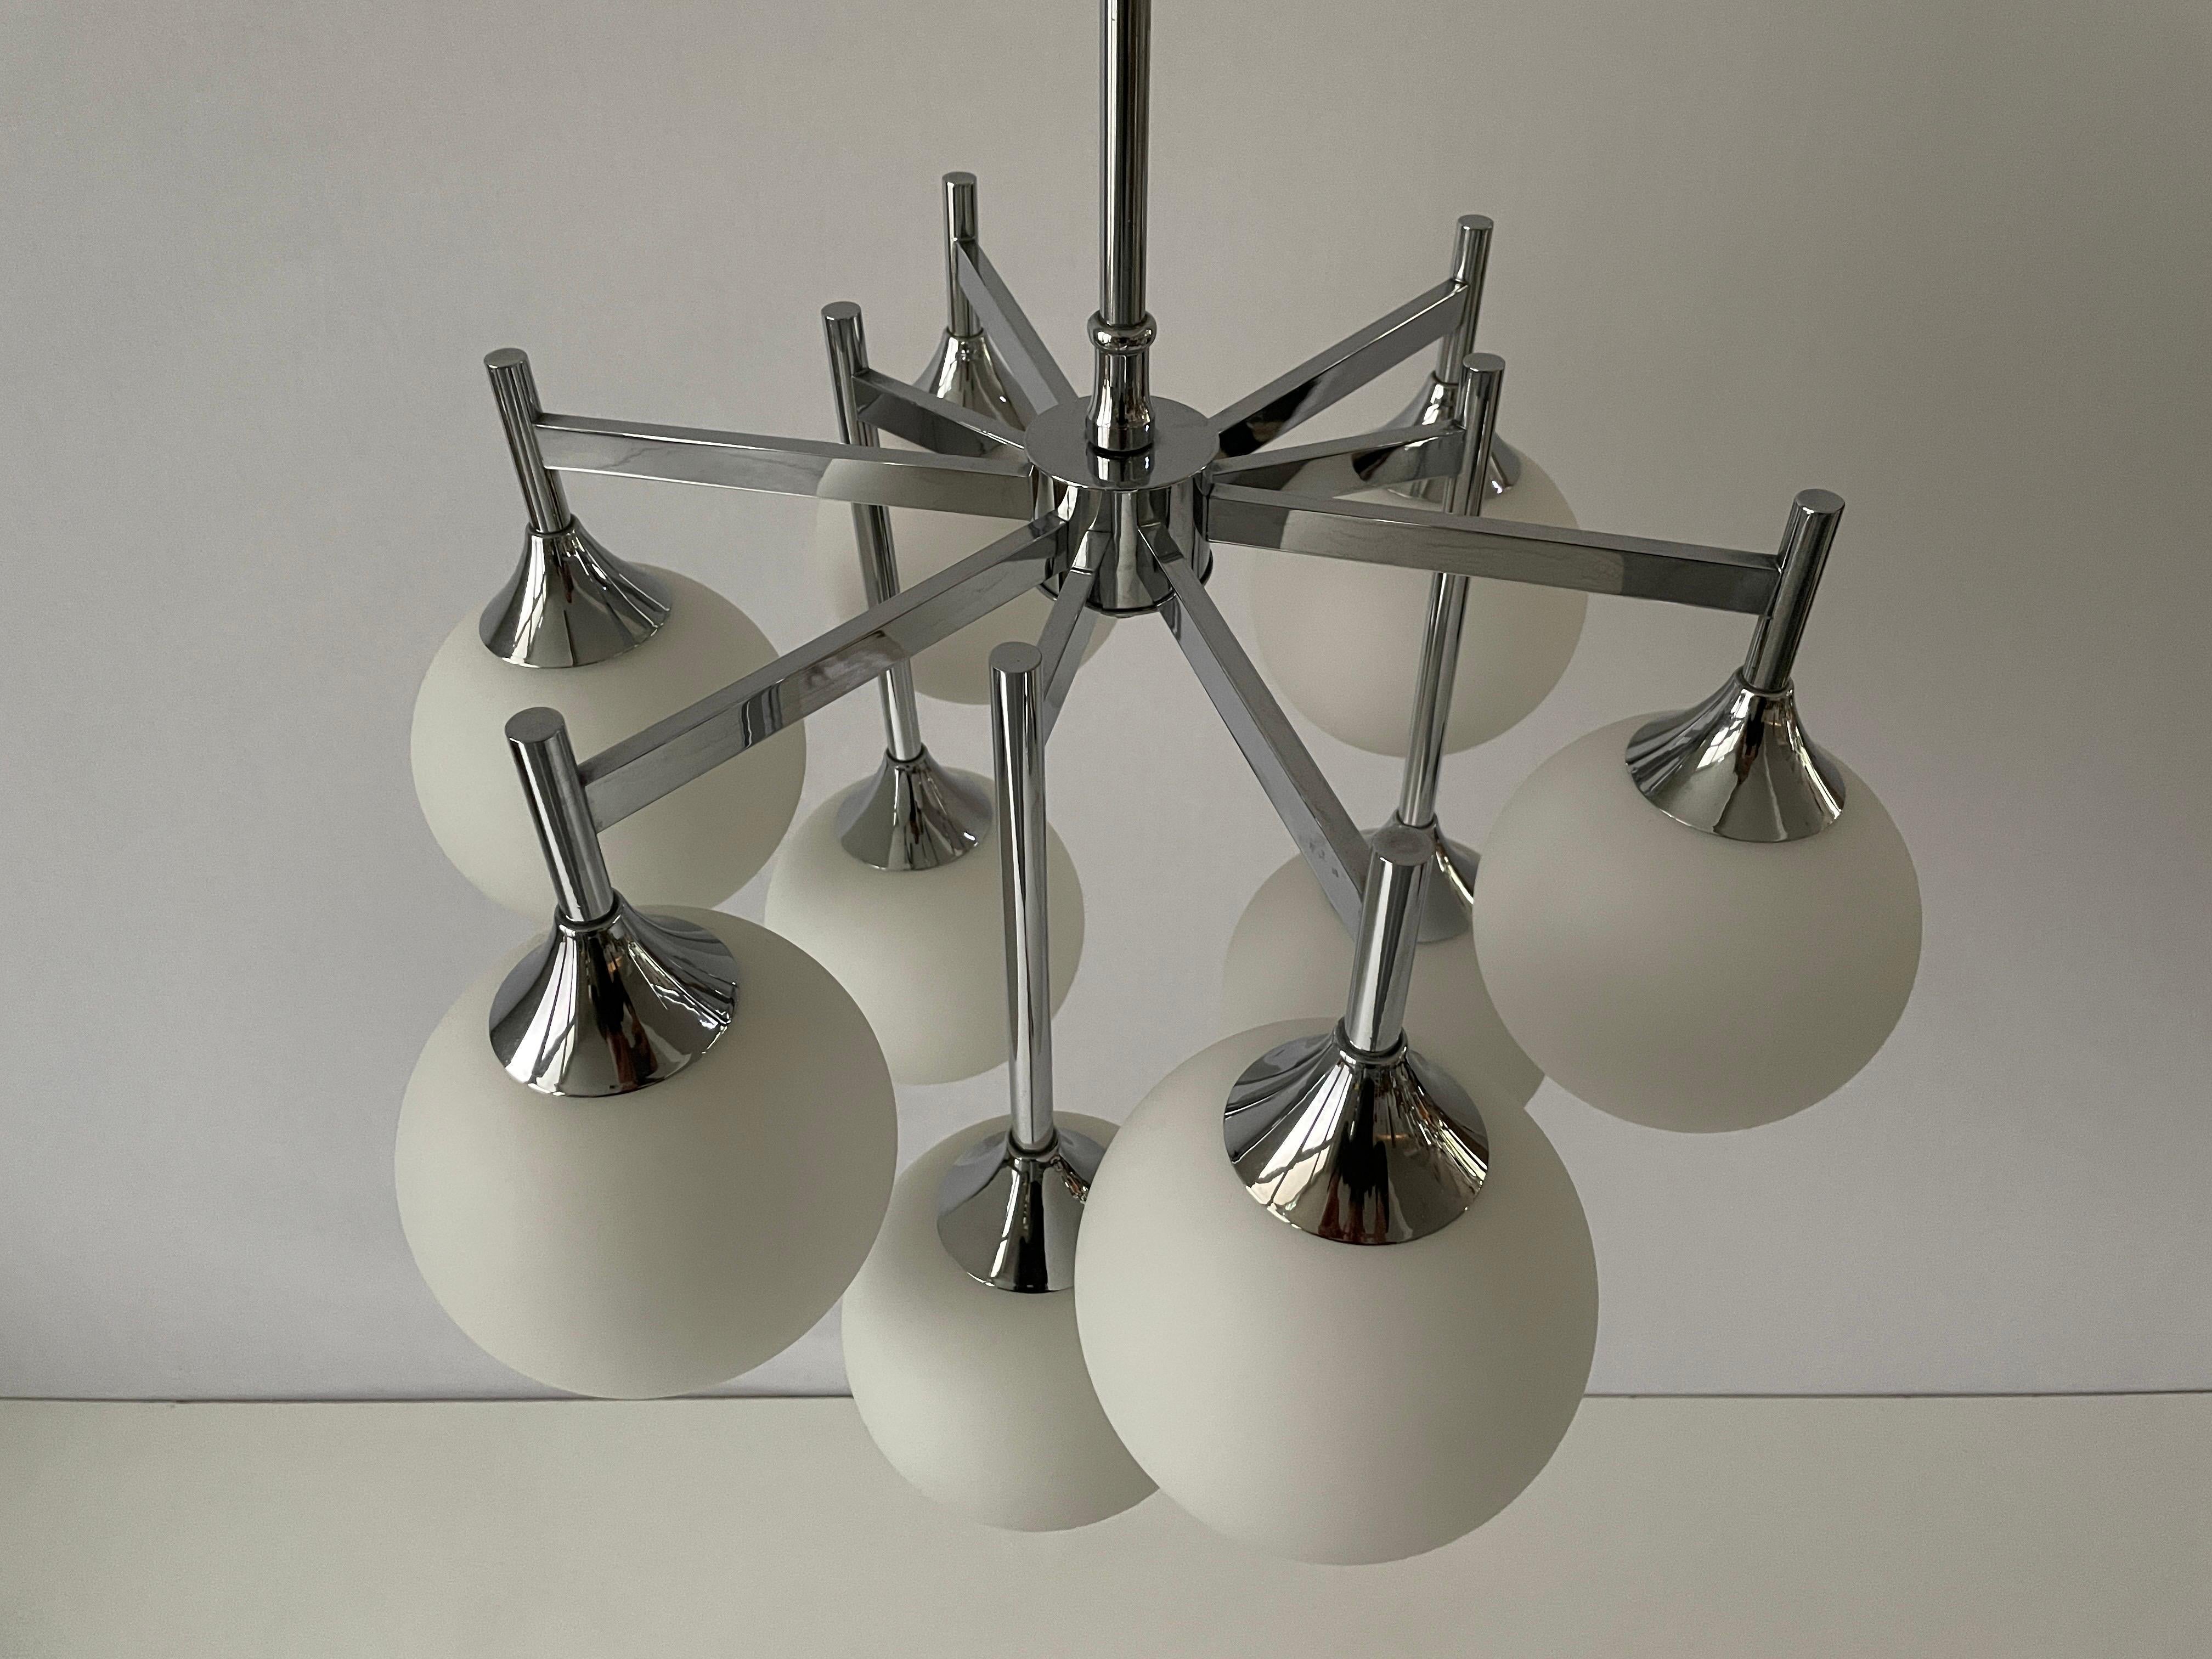 Metal 9 White Ball Glass and Chrome Body Chandelier by Kaiser Leuchten, 1960s, Germany For Sale